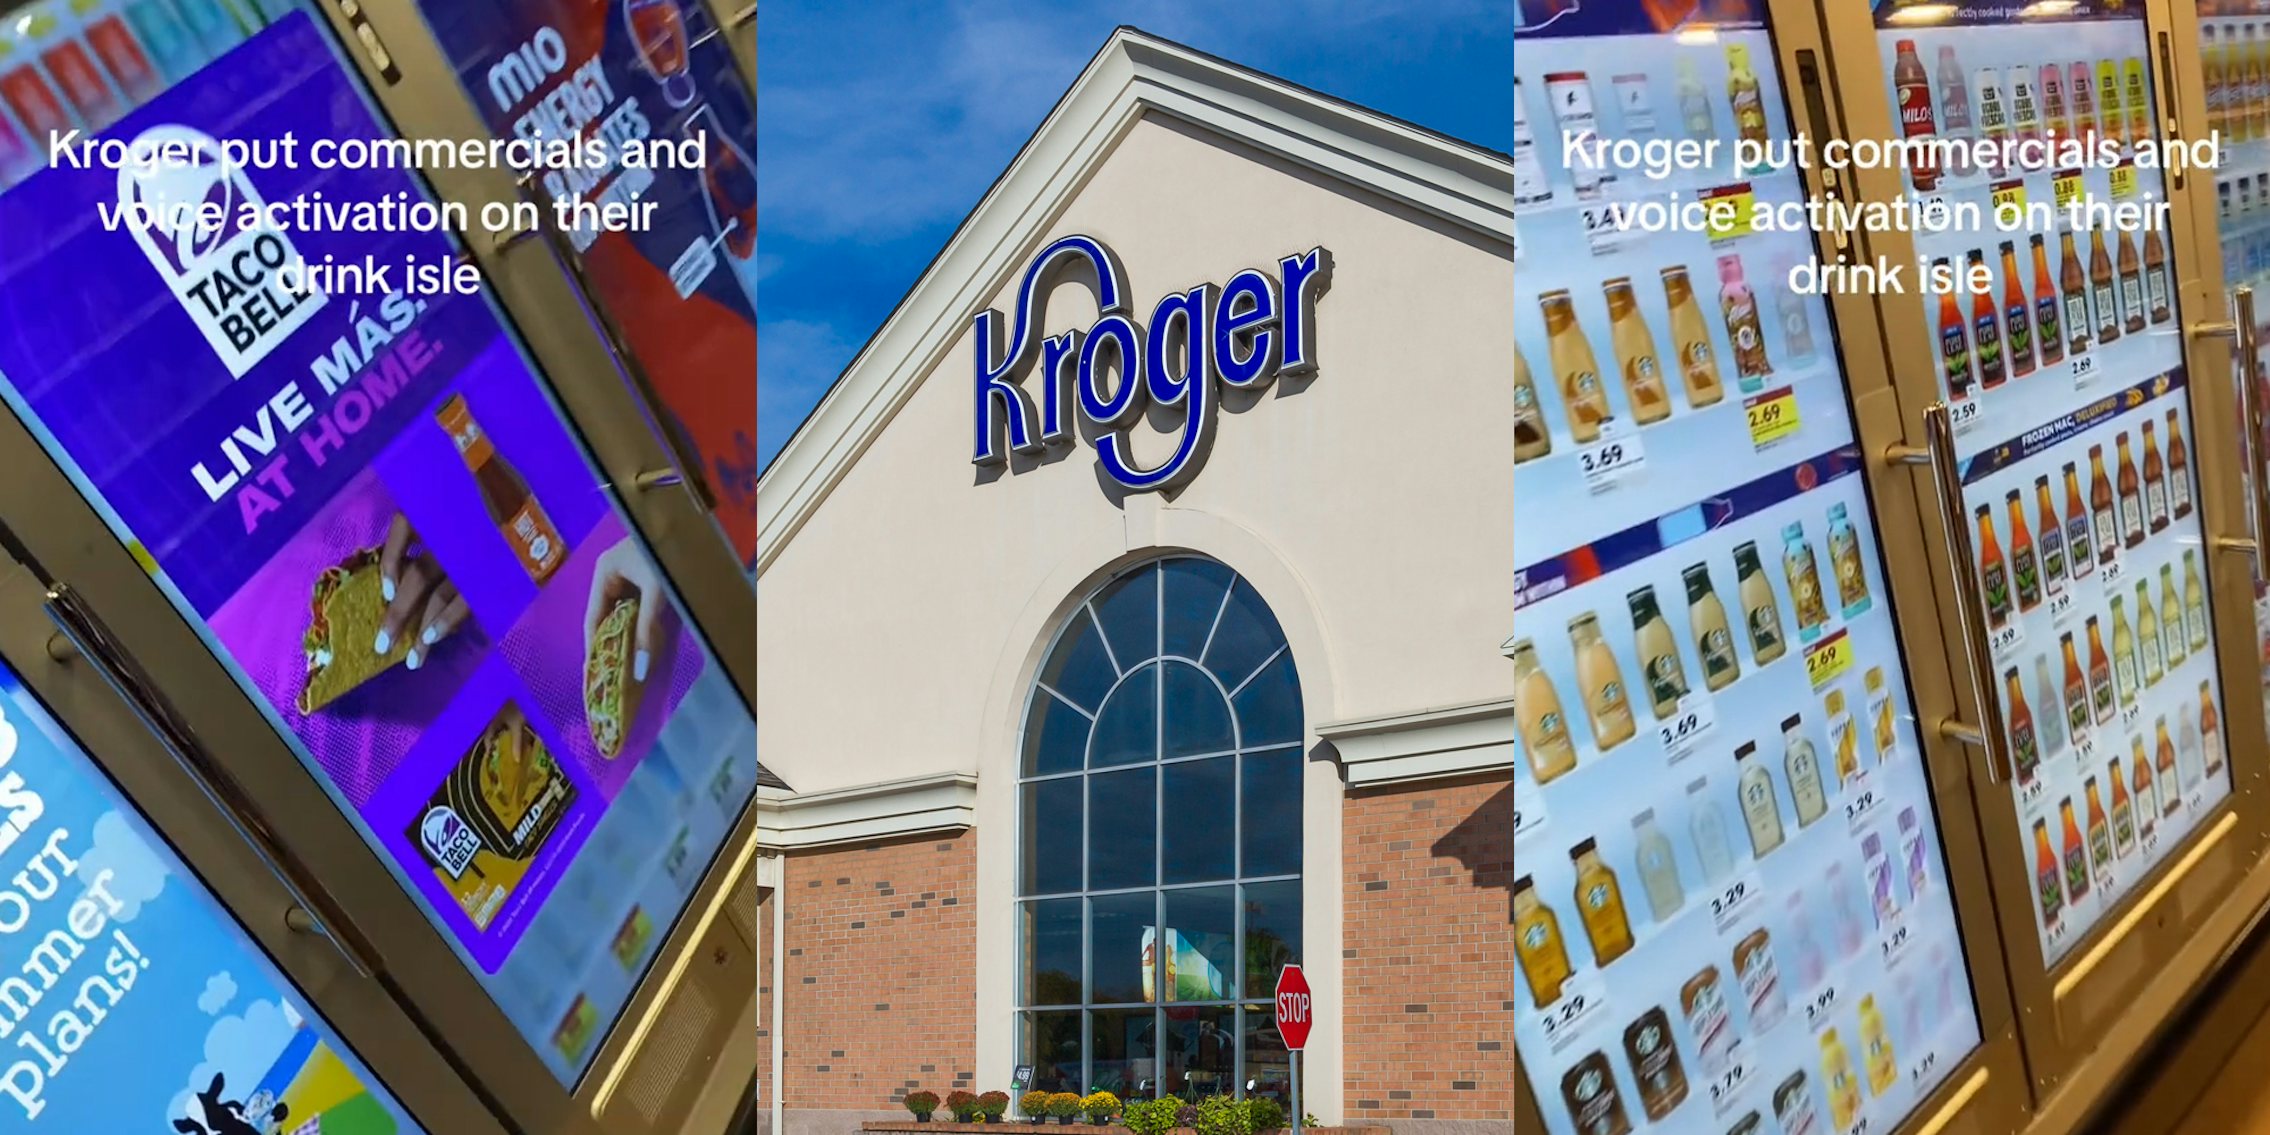 Kroger drink aisle with ads on refrigerator doors with caption 'Kroger commercials and voice activation on their drink aisle' (l) Kroger building with sign (c) Kroger drink aisle refrigerator doors with caption 'Kroger commercials and voice activation on their drink aisle' (r)